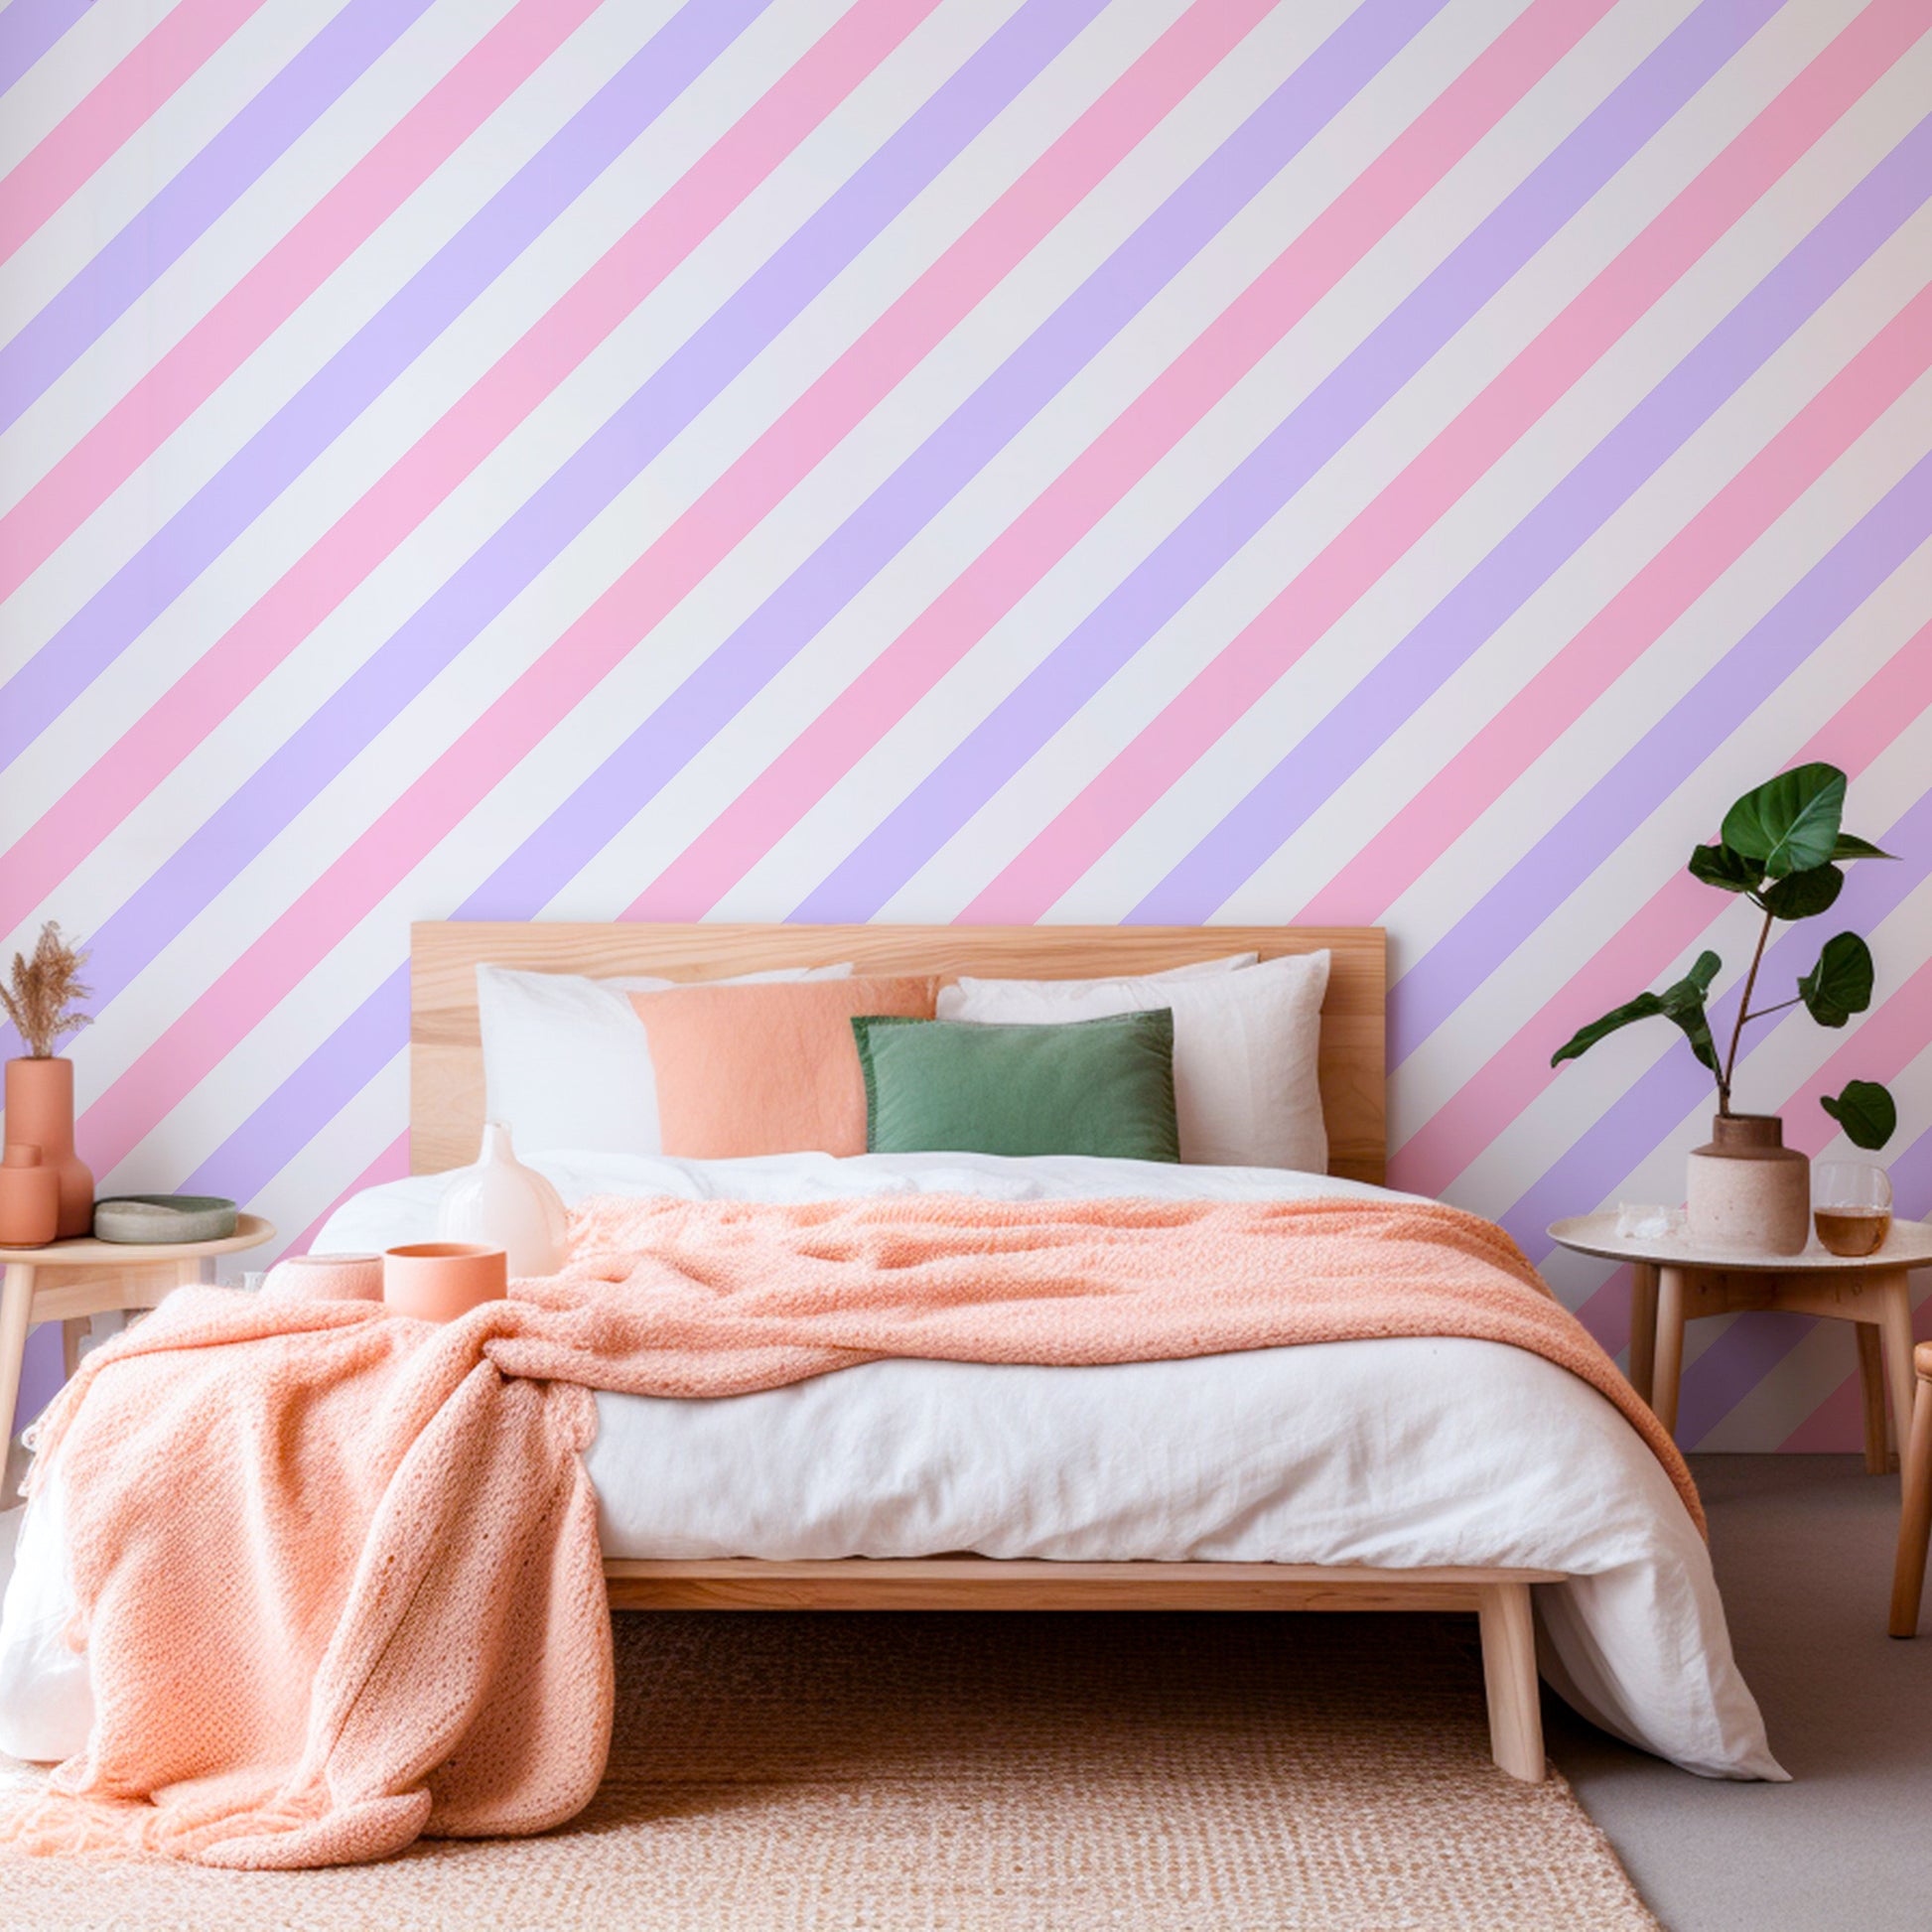 diagonal stripe wallpaper in pink and purple for bedroom walls